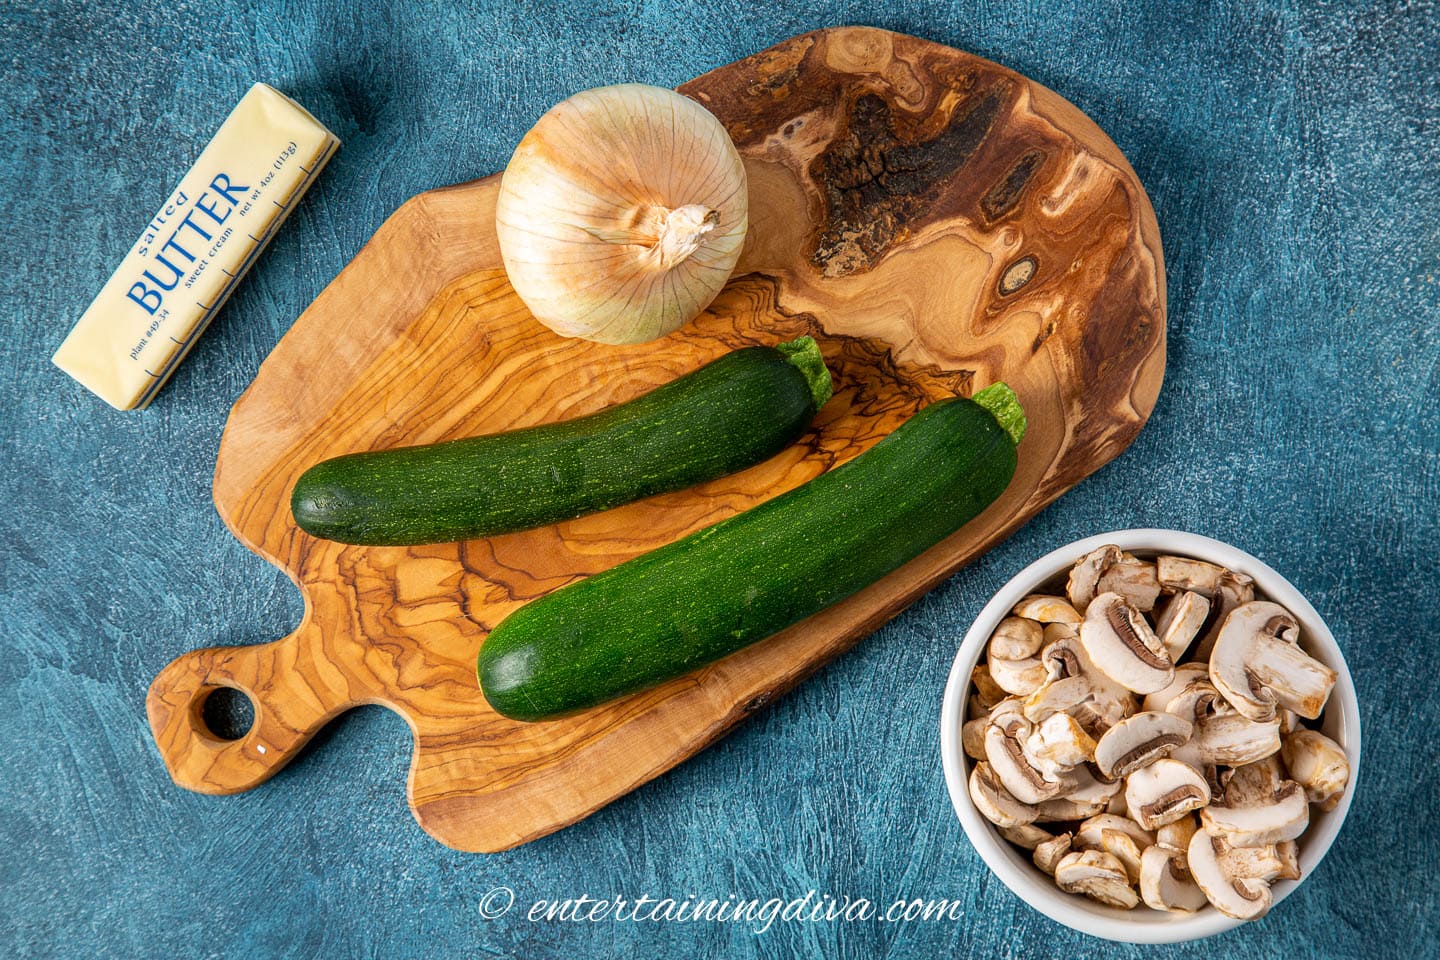 stir fry ingredients - butter, onion, zucchini and mushrooms